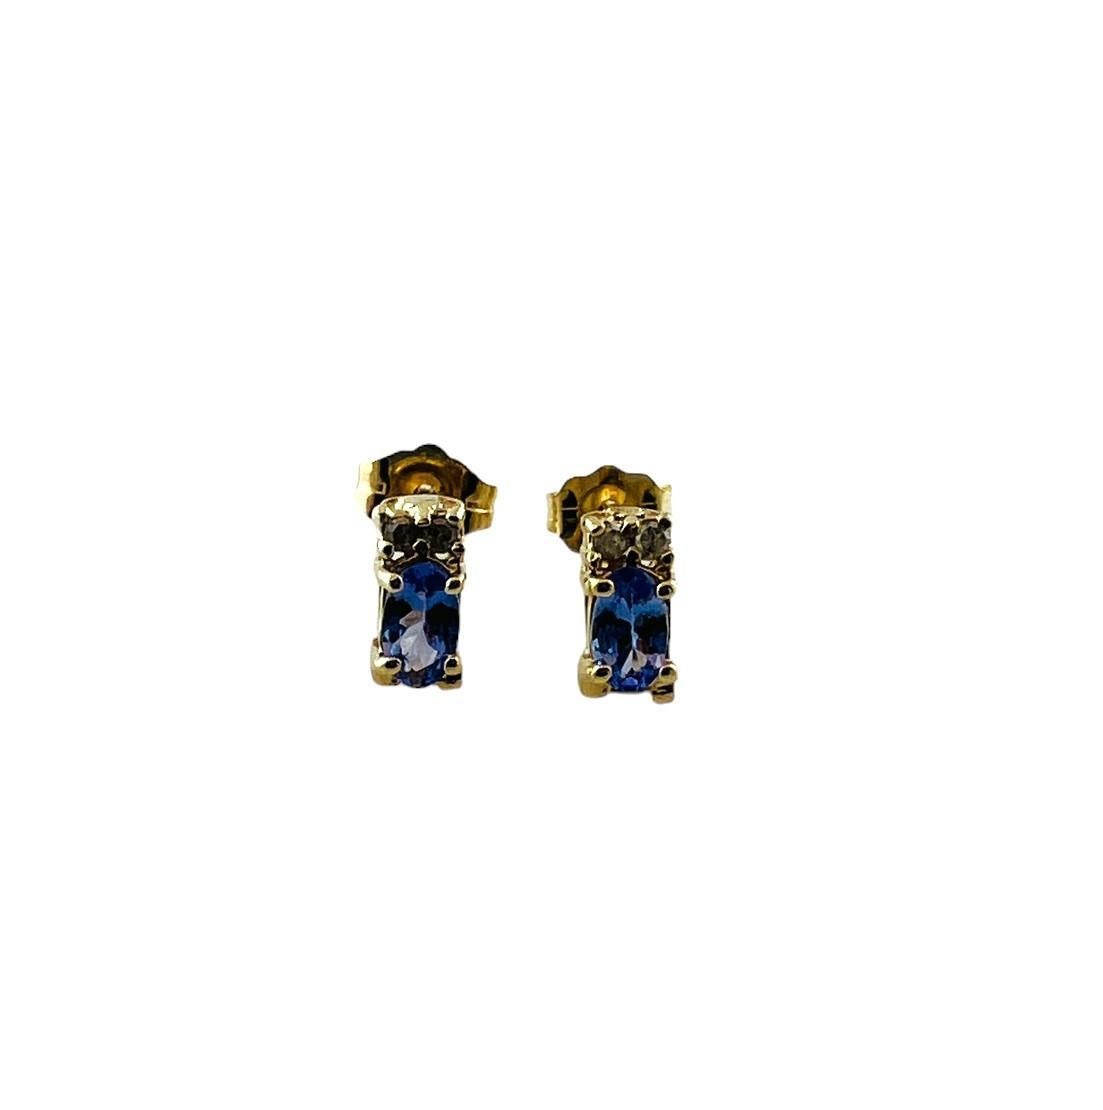 14K Yellow Gold Tanzanite and Diamond Stud Earrings

These earrings are set in 14K yellow gold.

Each earring is set with one oval faceted tanzanite stone and 2 single cut diamonds

Single cut diamonds are approx. .03cts in total weight and of I3